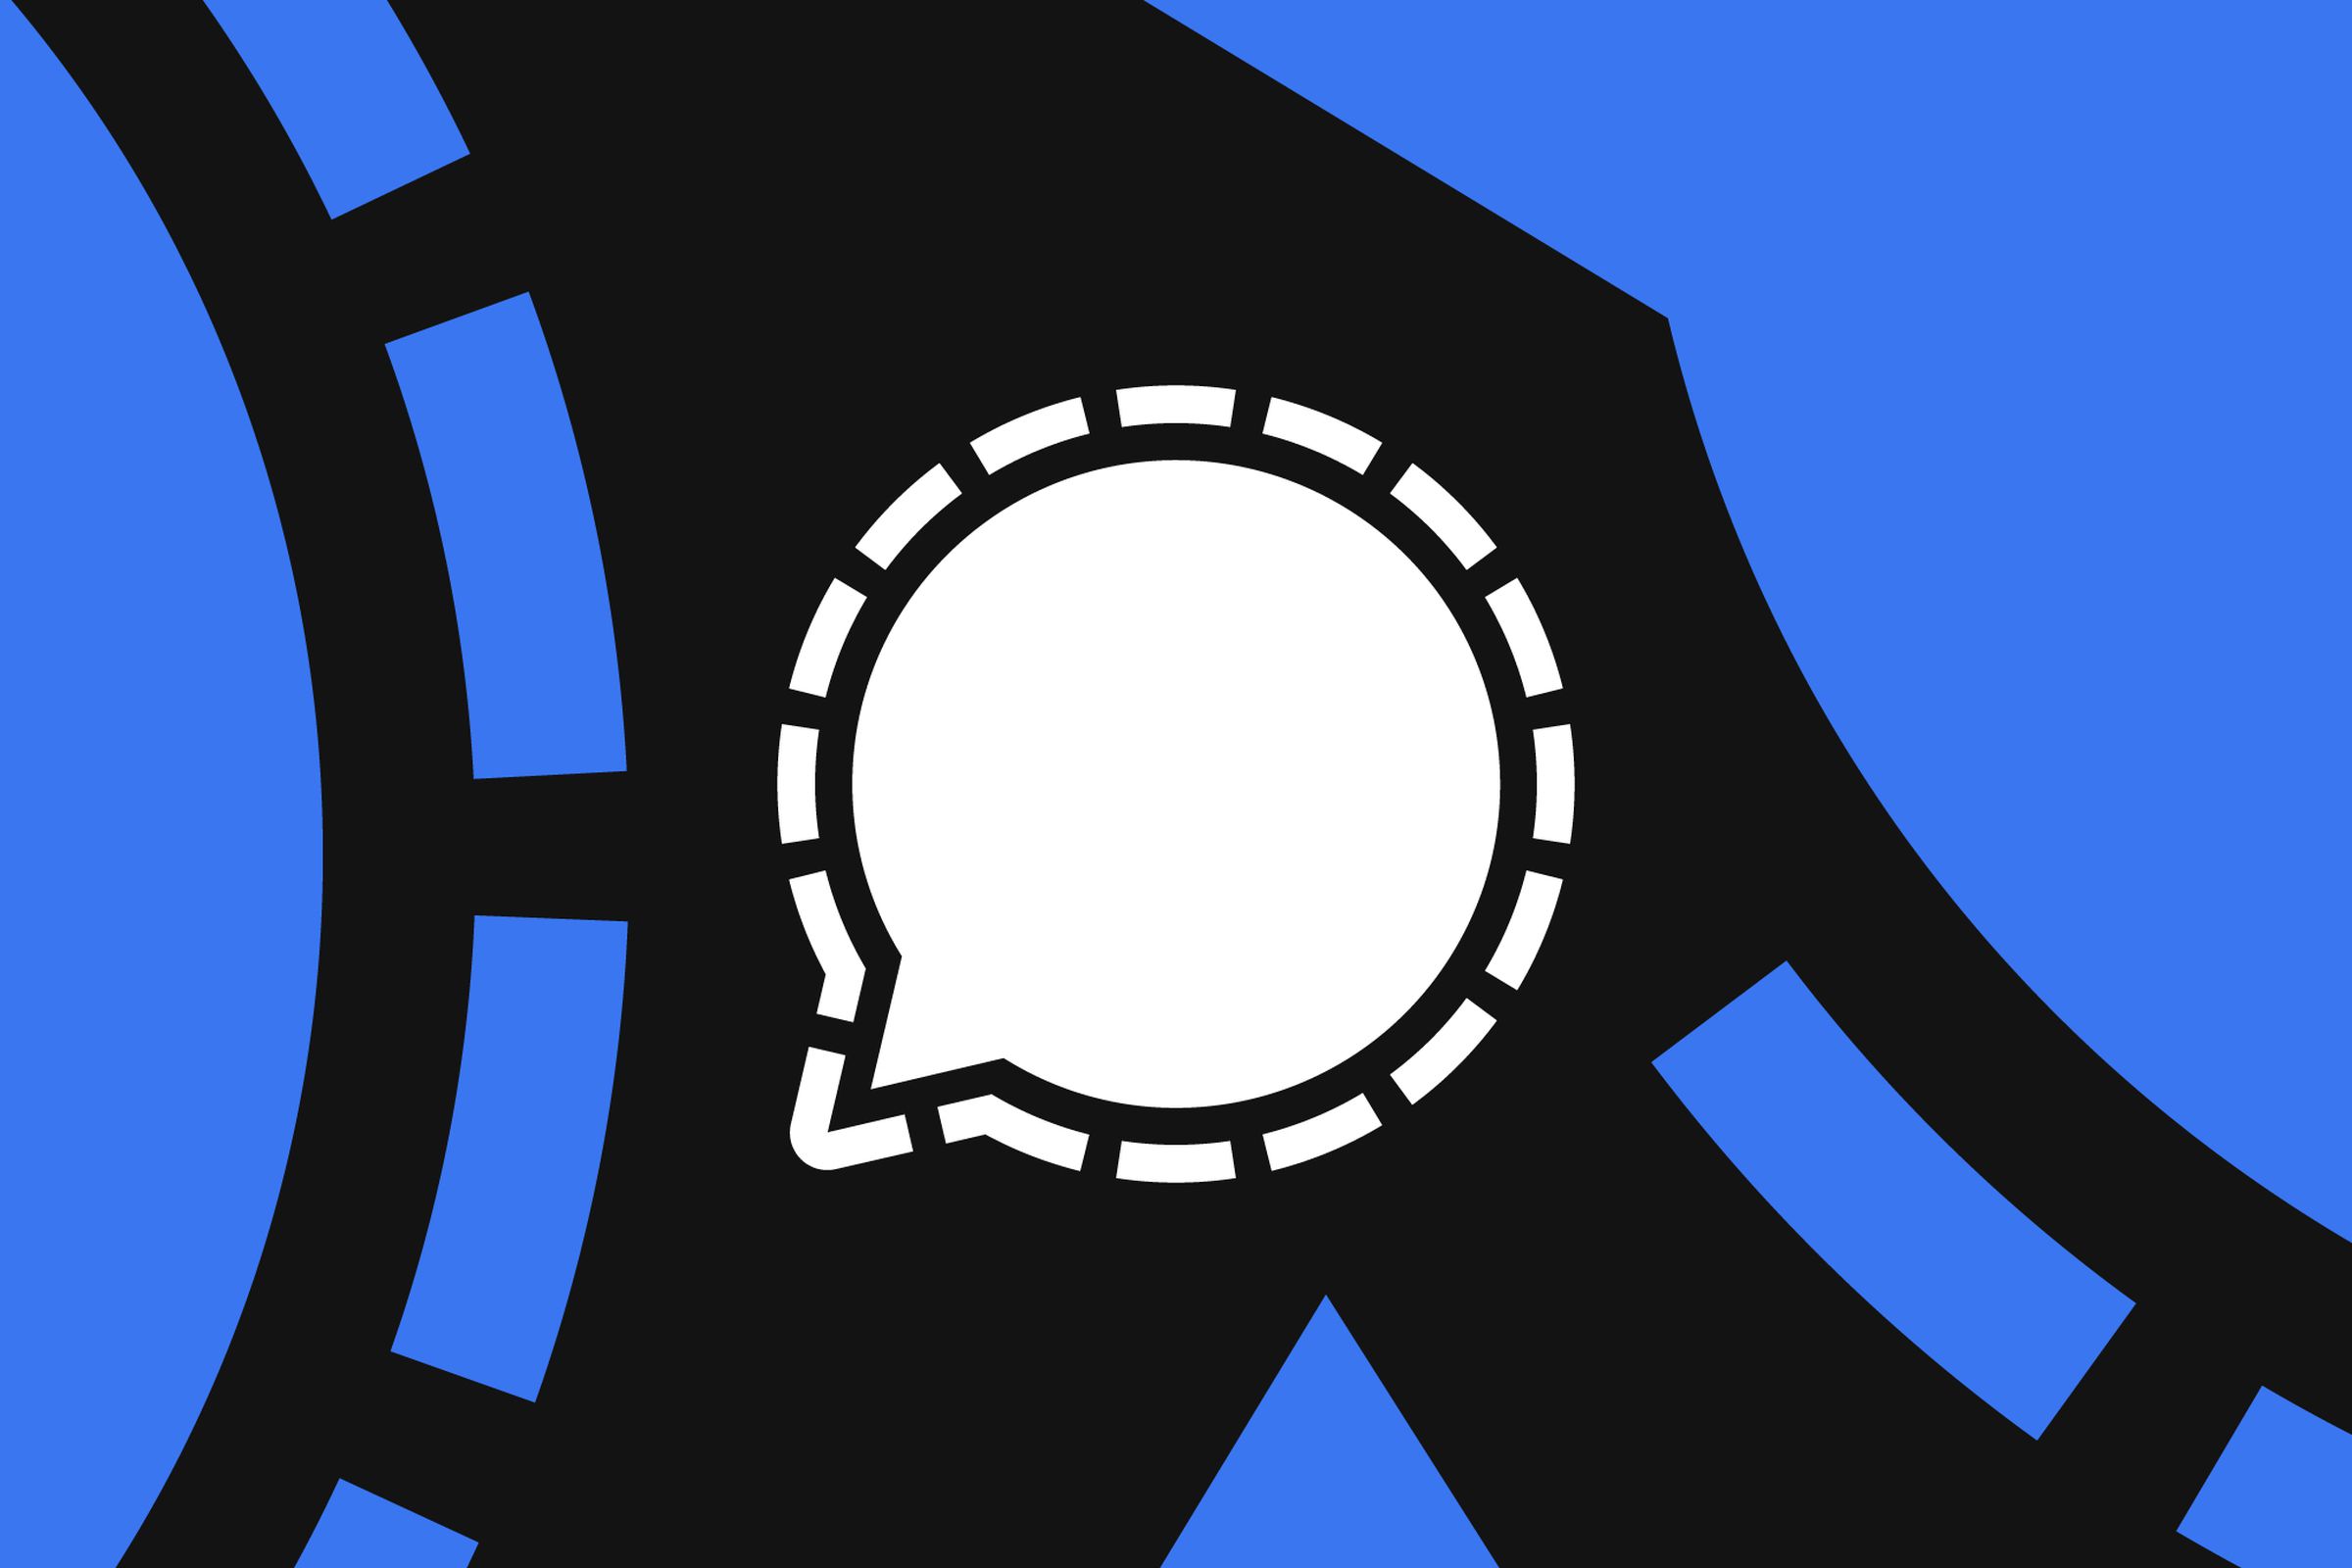 Illustration of the Signal logo: a white speech balloon with a dotted outline on a black and blue background.